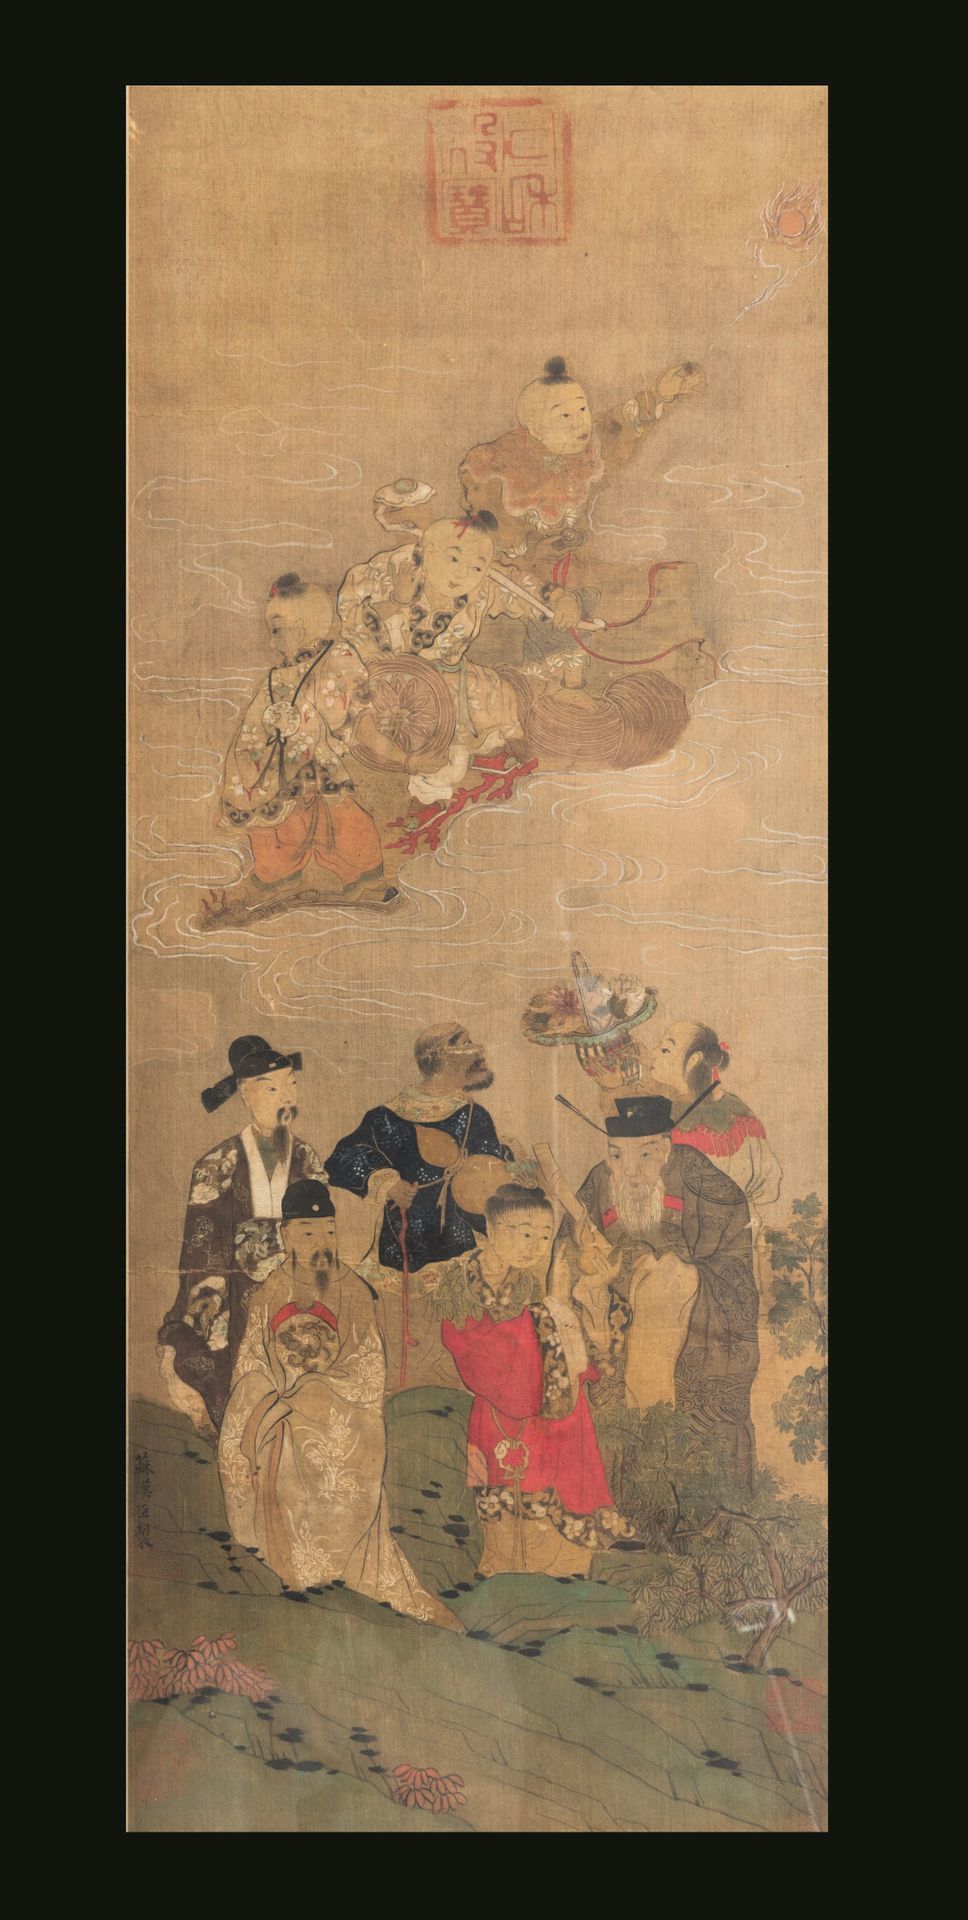 A painting on silk, China, Qing Dynasty 1800s, W. 37 - H. 72 Cm